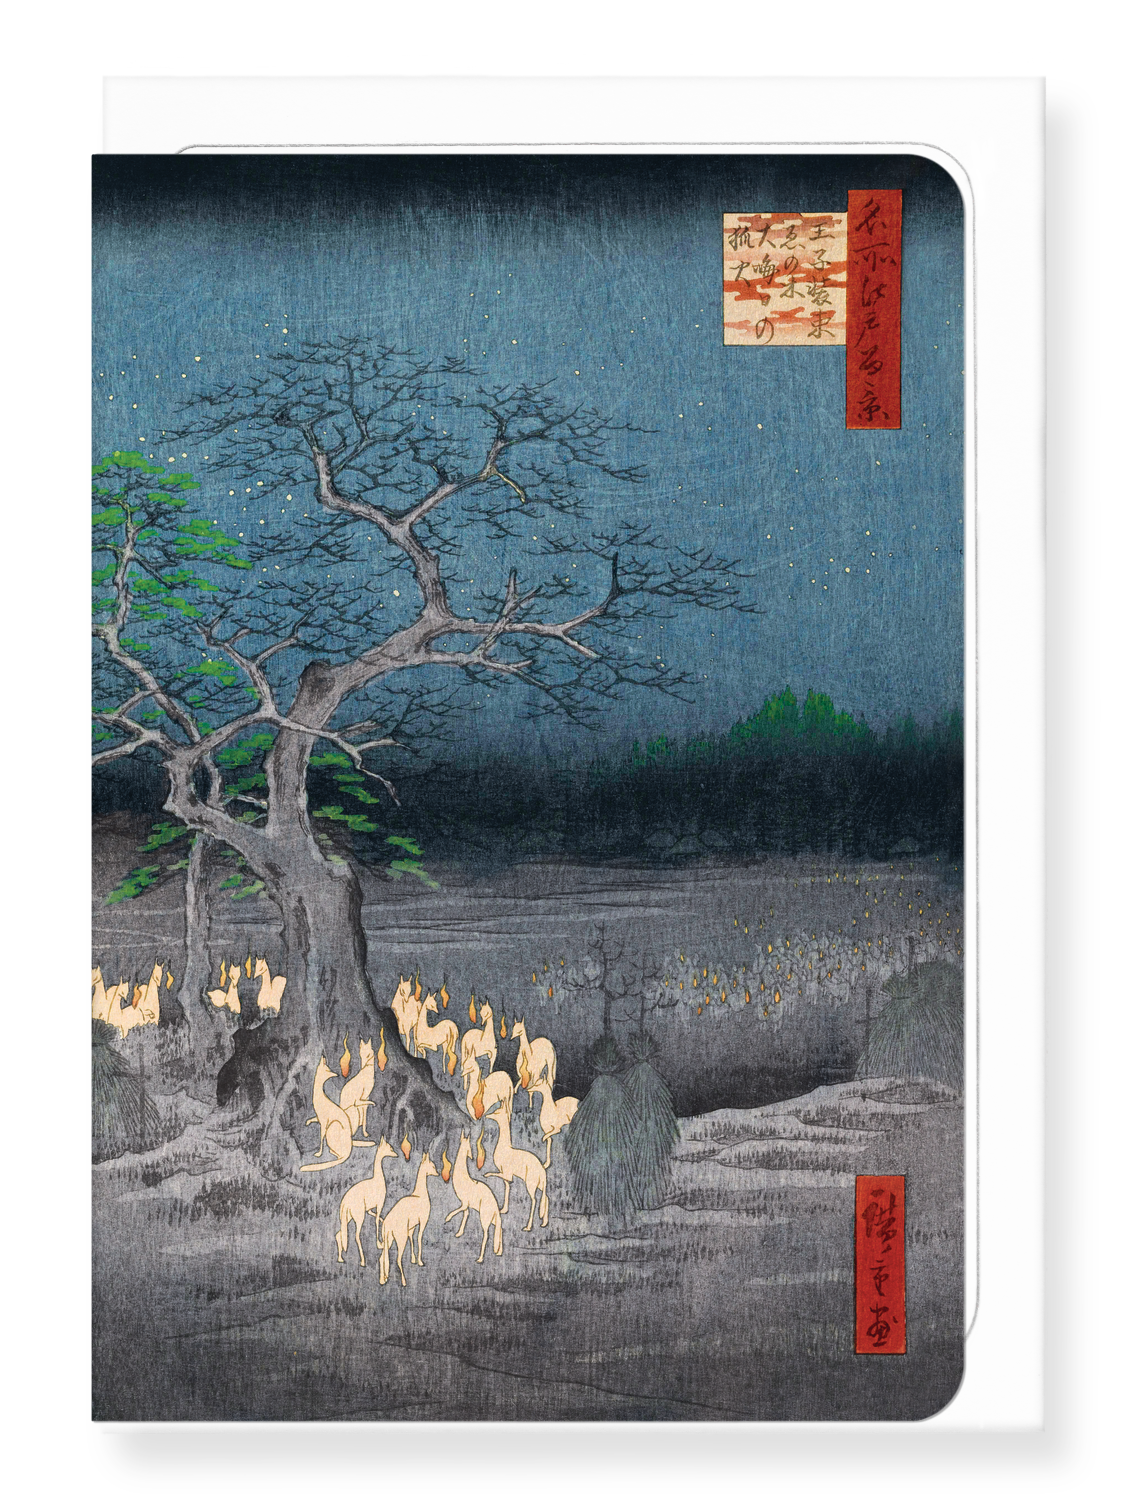 Ezen Designs - New Year's Eve Foxfires at the Changing Tree, Oji (1857) - Greeting Card - Front